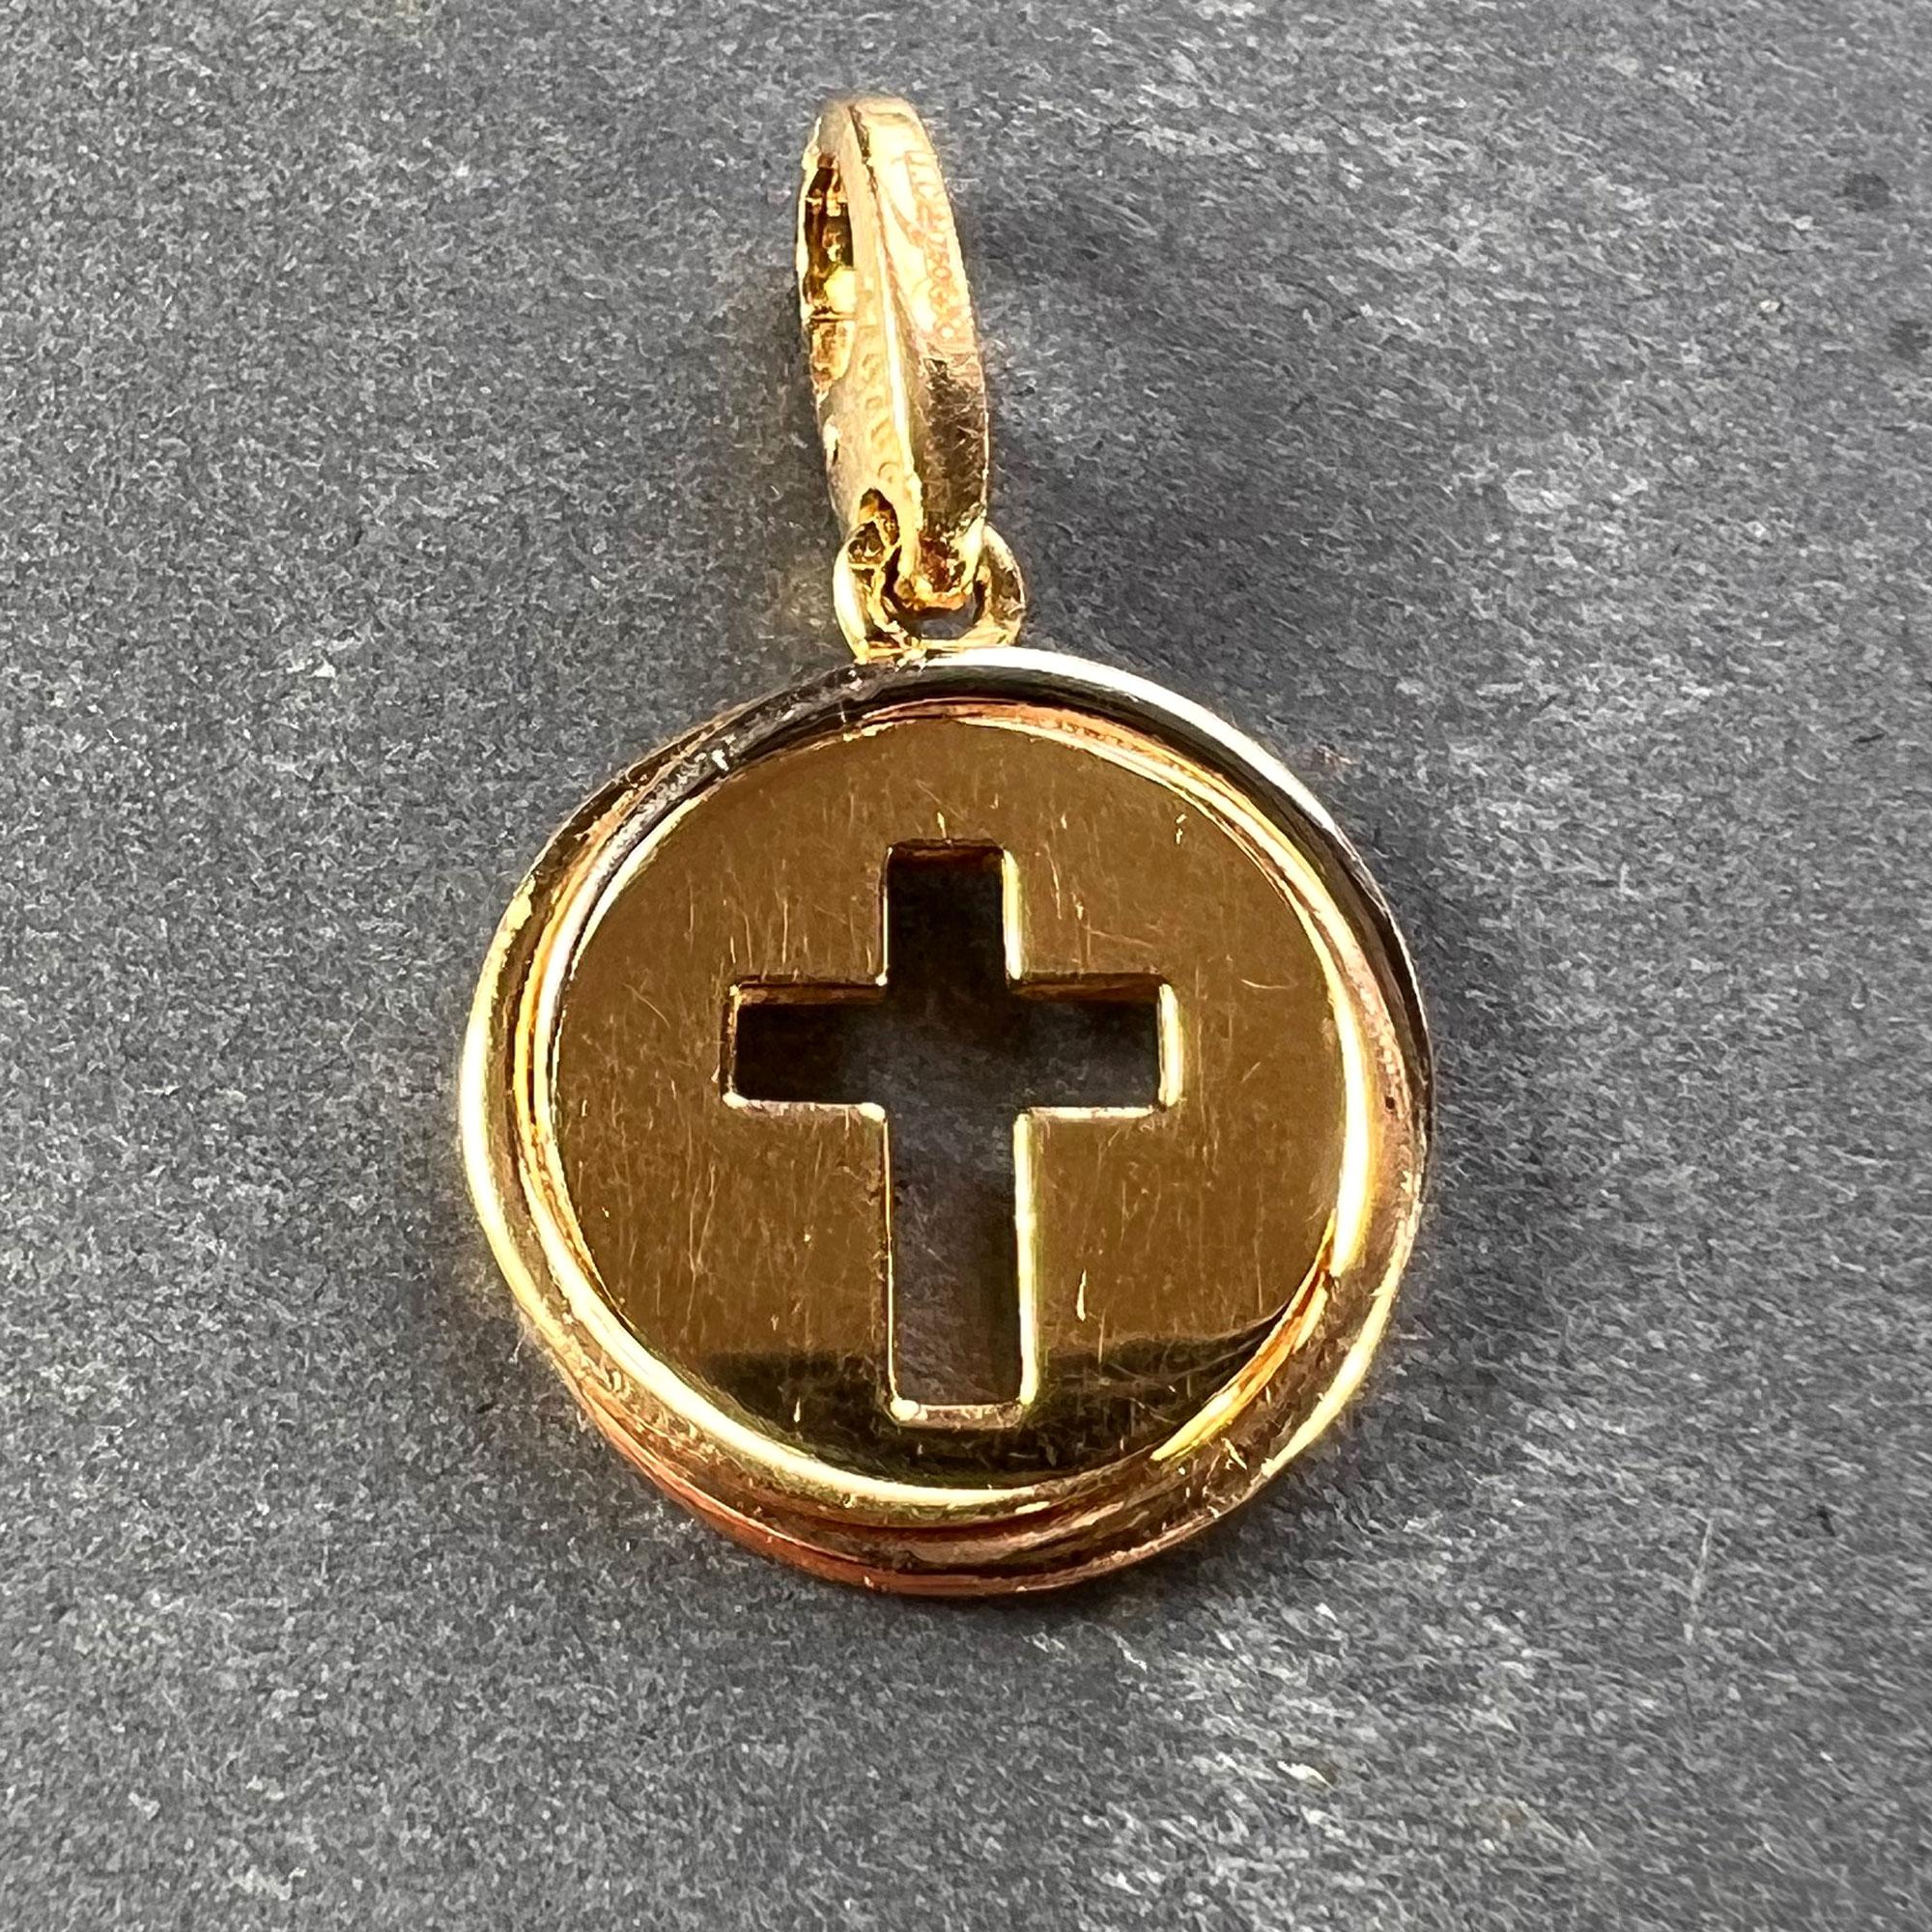 An 18 karat (18K) gold charm pendant designed as a yellow gold disc with a pierced cross motif surrounded by the Trinity style edge of twisted yellow, rose and white gold wires. Signed Cartier, stamped with the eagle’s head for French manufacture